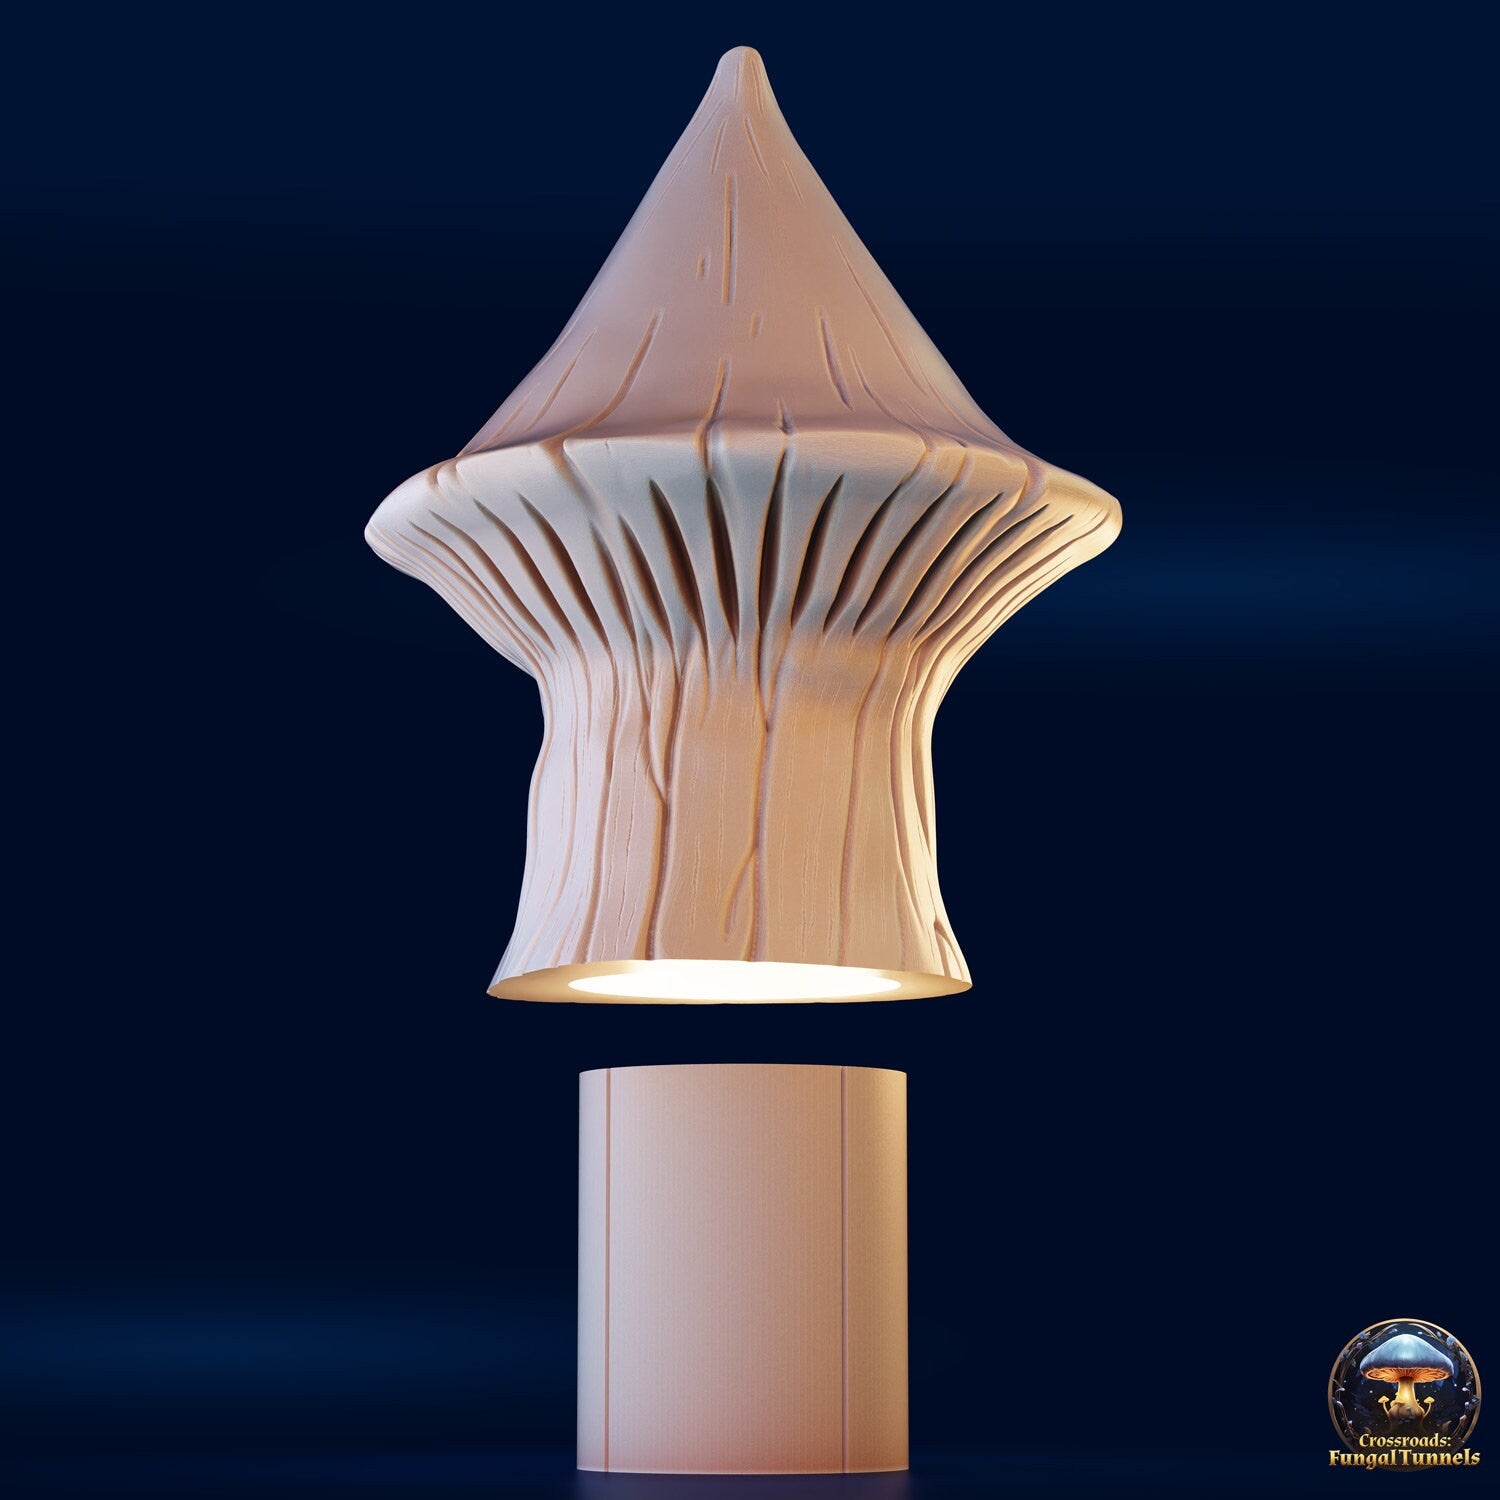 LED Mushroom Tealight Holder - Fungal Tunnels by 3DHexes | Big Fungus Terrain for Roleplaying and Gaming | Shroom